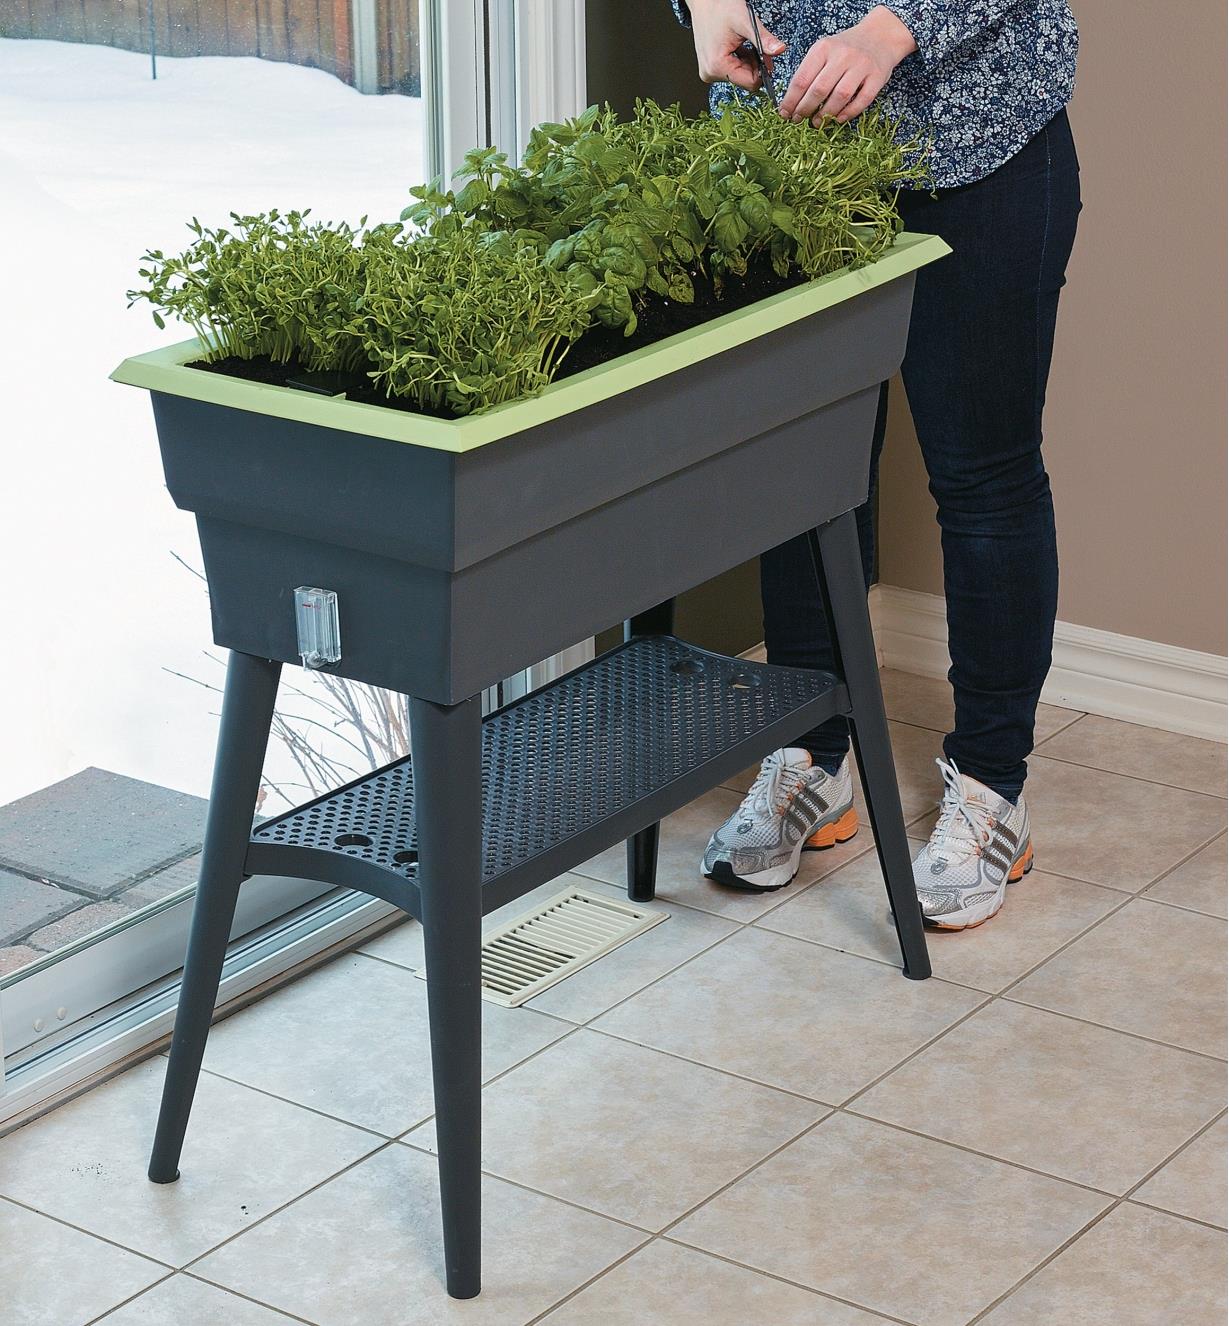 A woman clips herbs growing in the Self-Watering Raised Planter